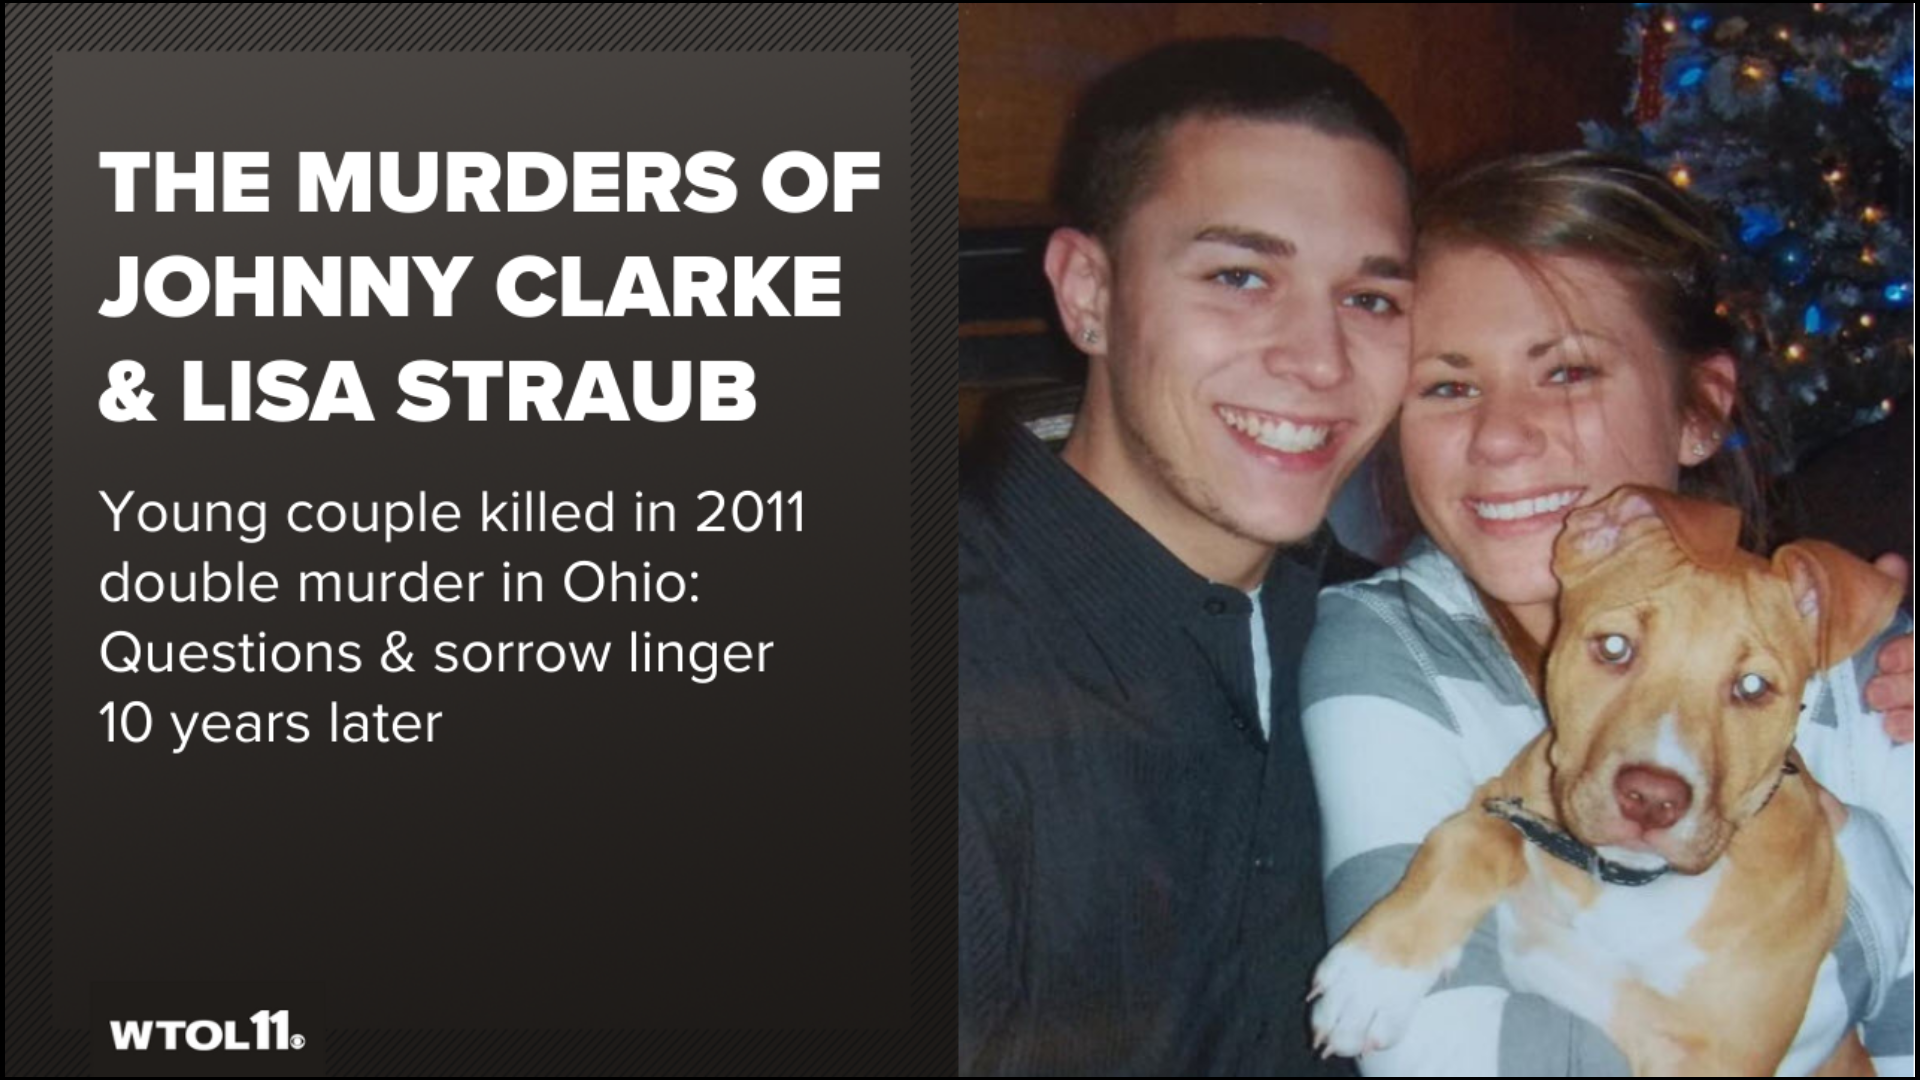 10 years ago, boyfriend and girlfriend Johnny Clarke and Lisa Straub were killed in the prime of their lives.